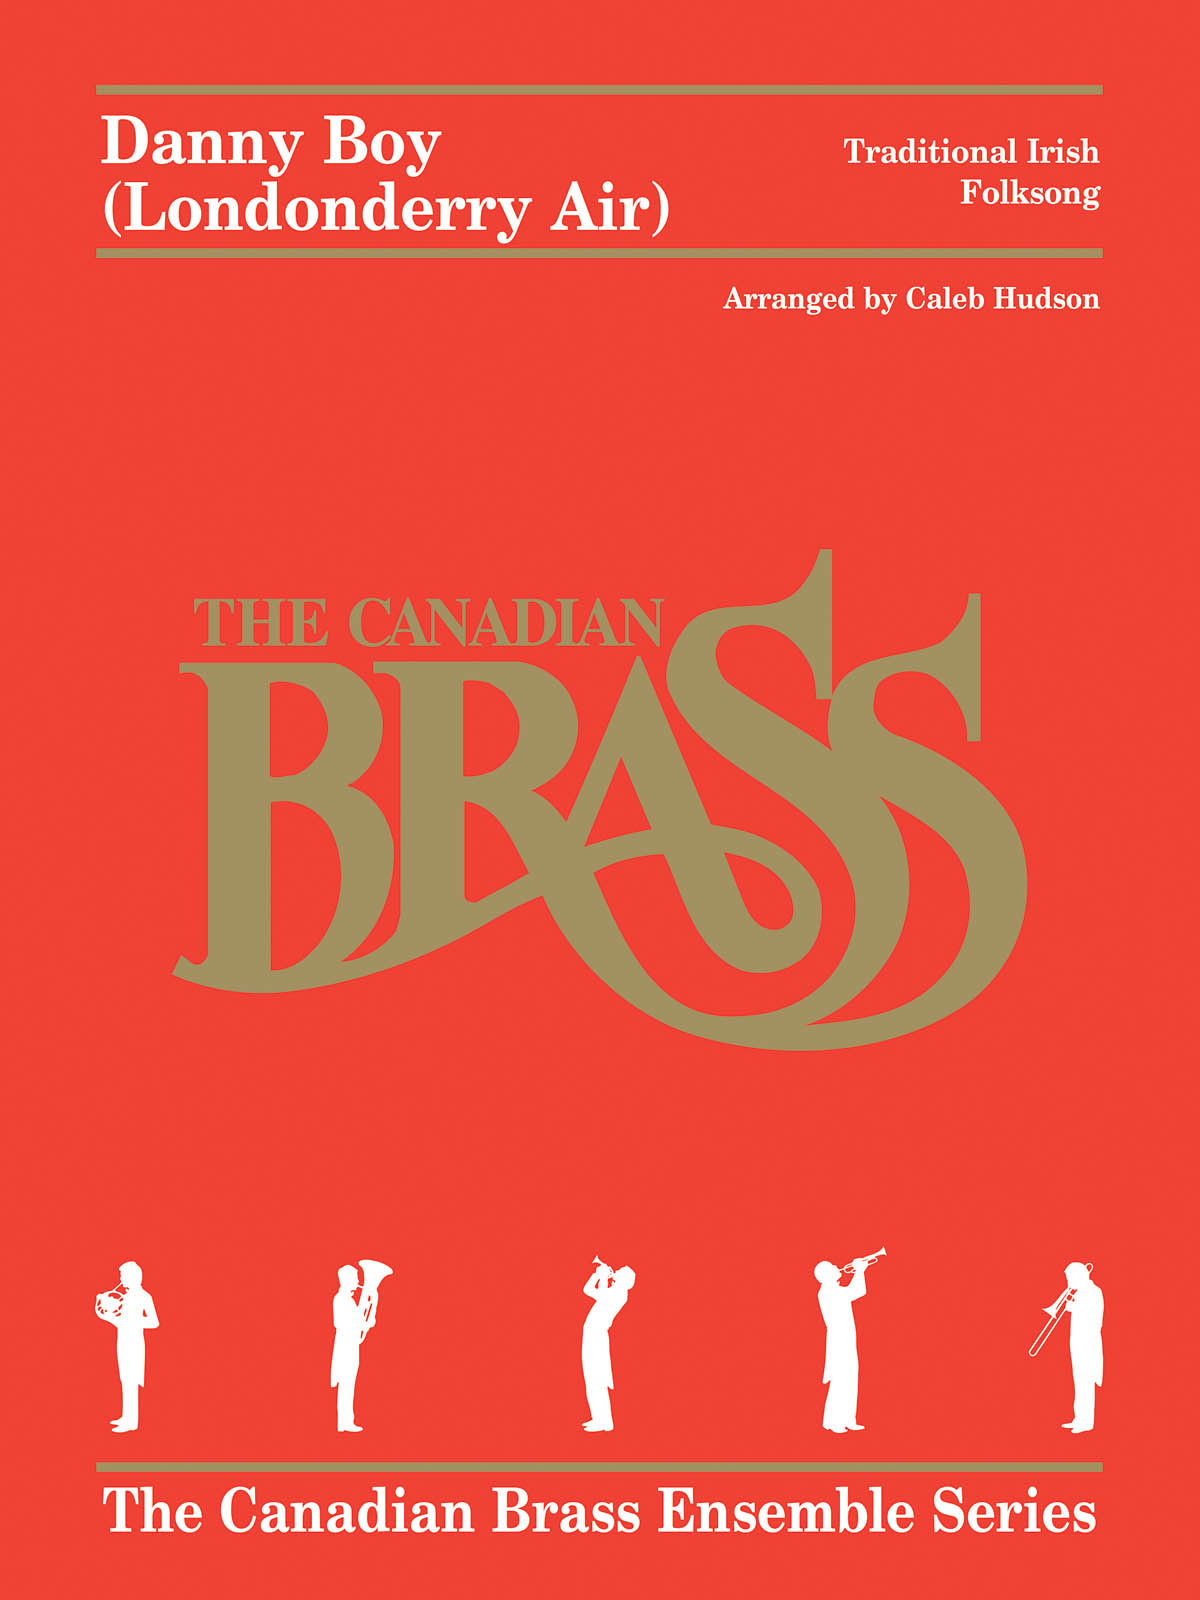 The Canadian Brass: Danny Boy [Londonderry Air]: Brass Ensemble: Score & Parts